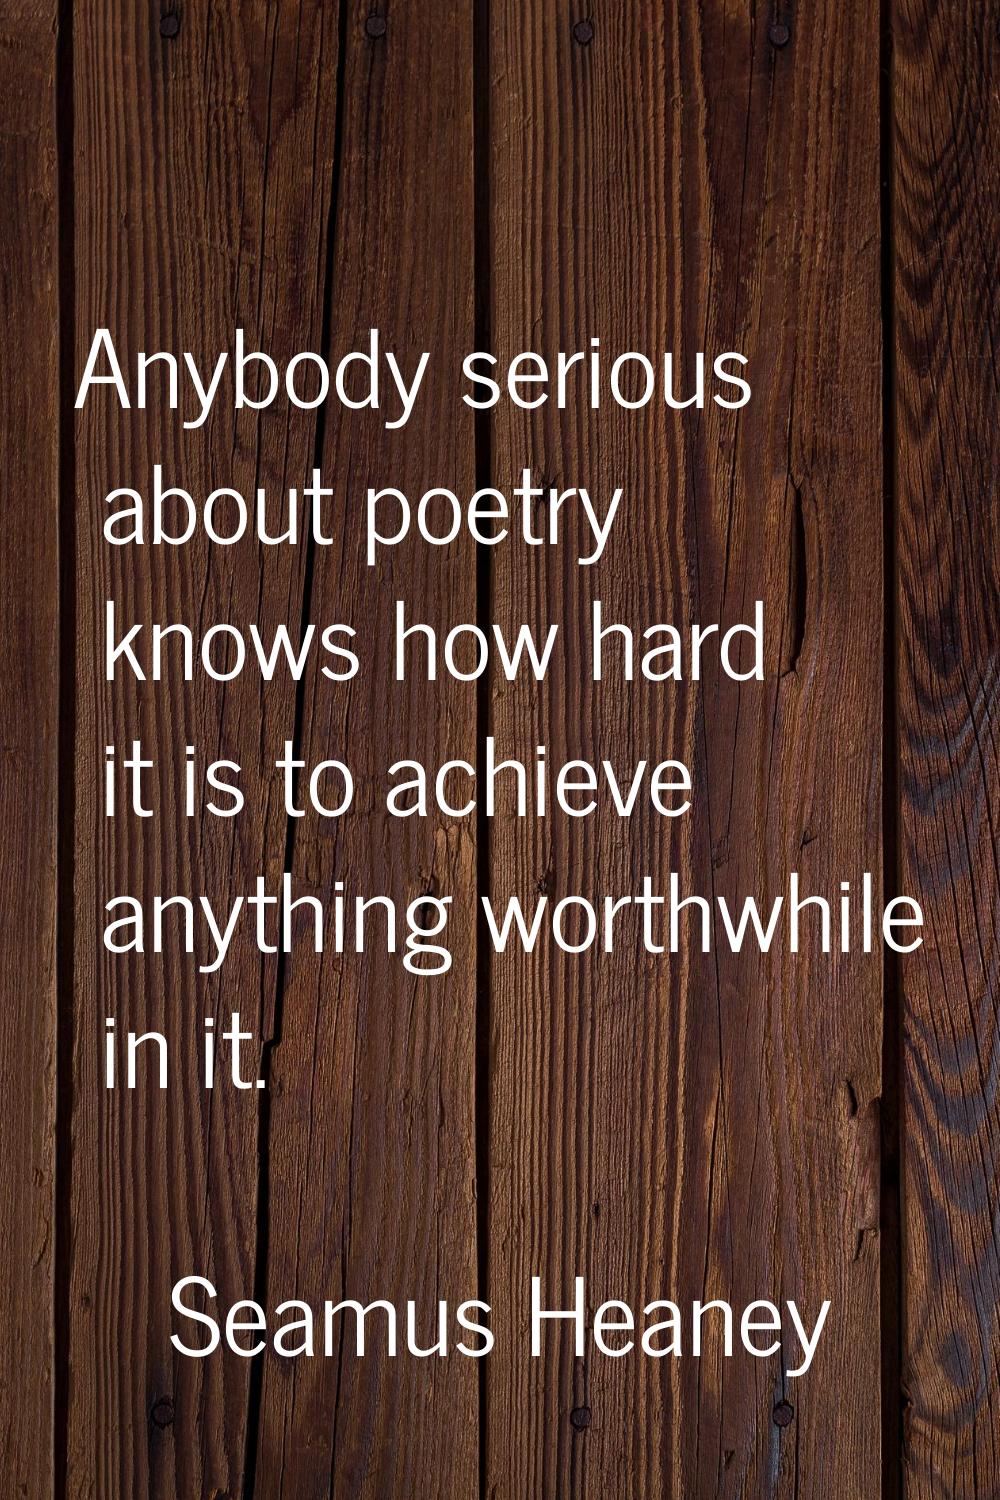 Anybody serious about poetry knows how hard it is to achieve anything worthwhile in it.